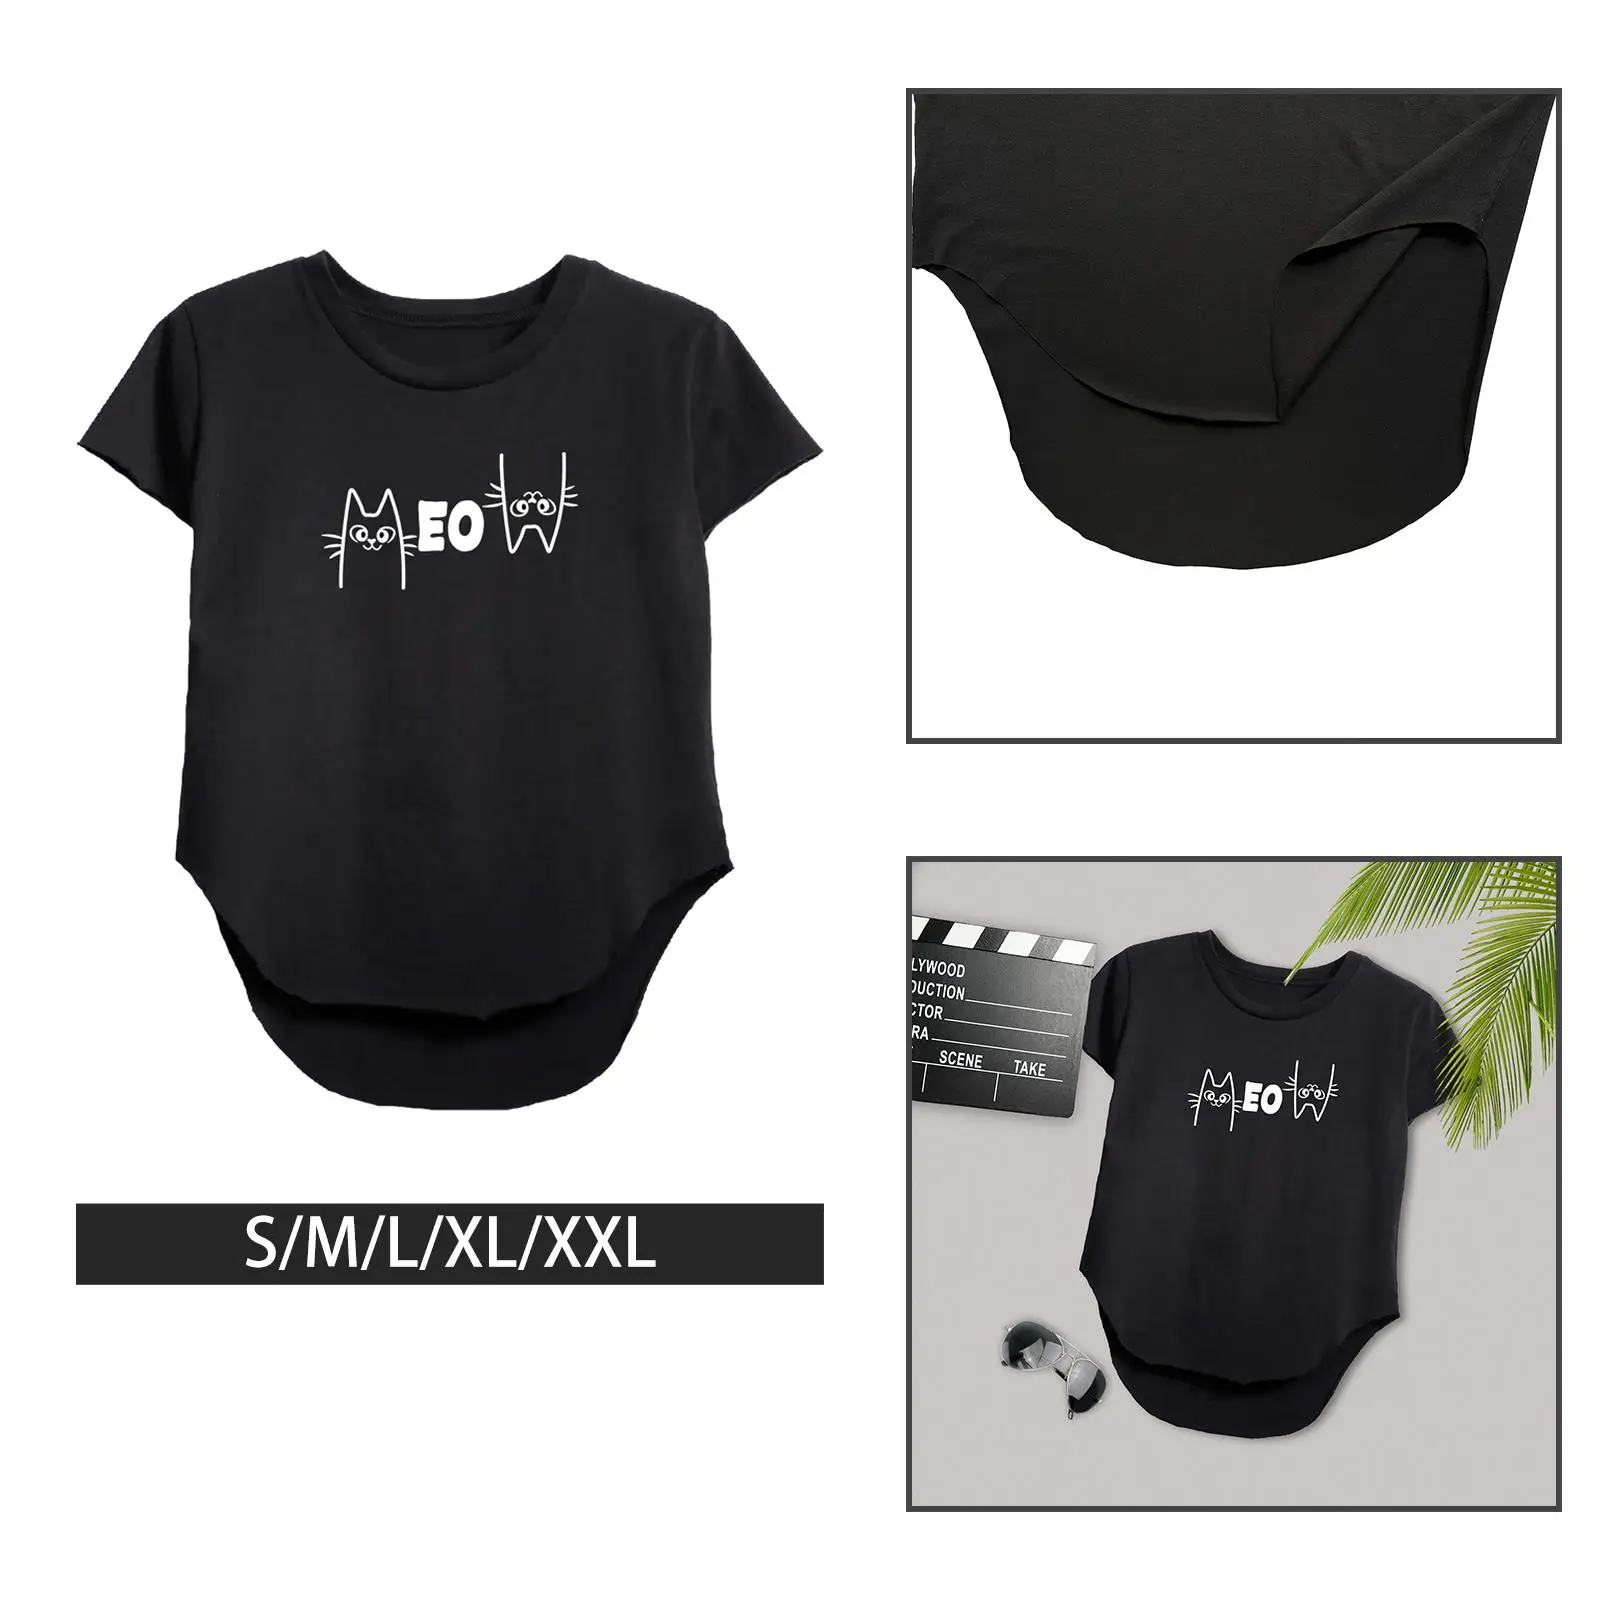 Women Short Sleeve T Shirt Summer Tops Crewneck Gift Black Clothing Tunic Tops Basic Tee for Vacation Commuting Sports Travel